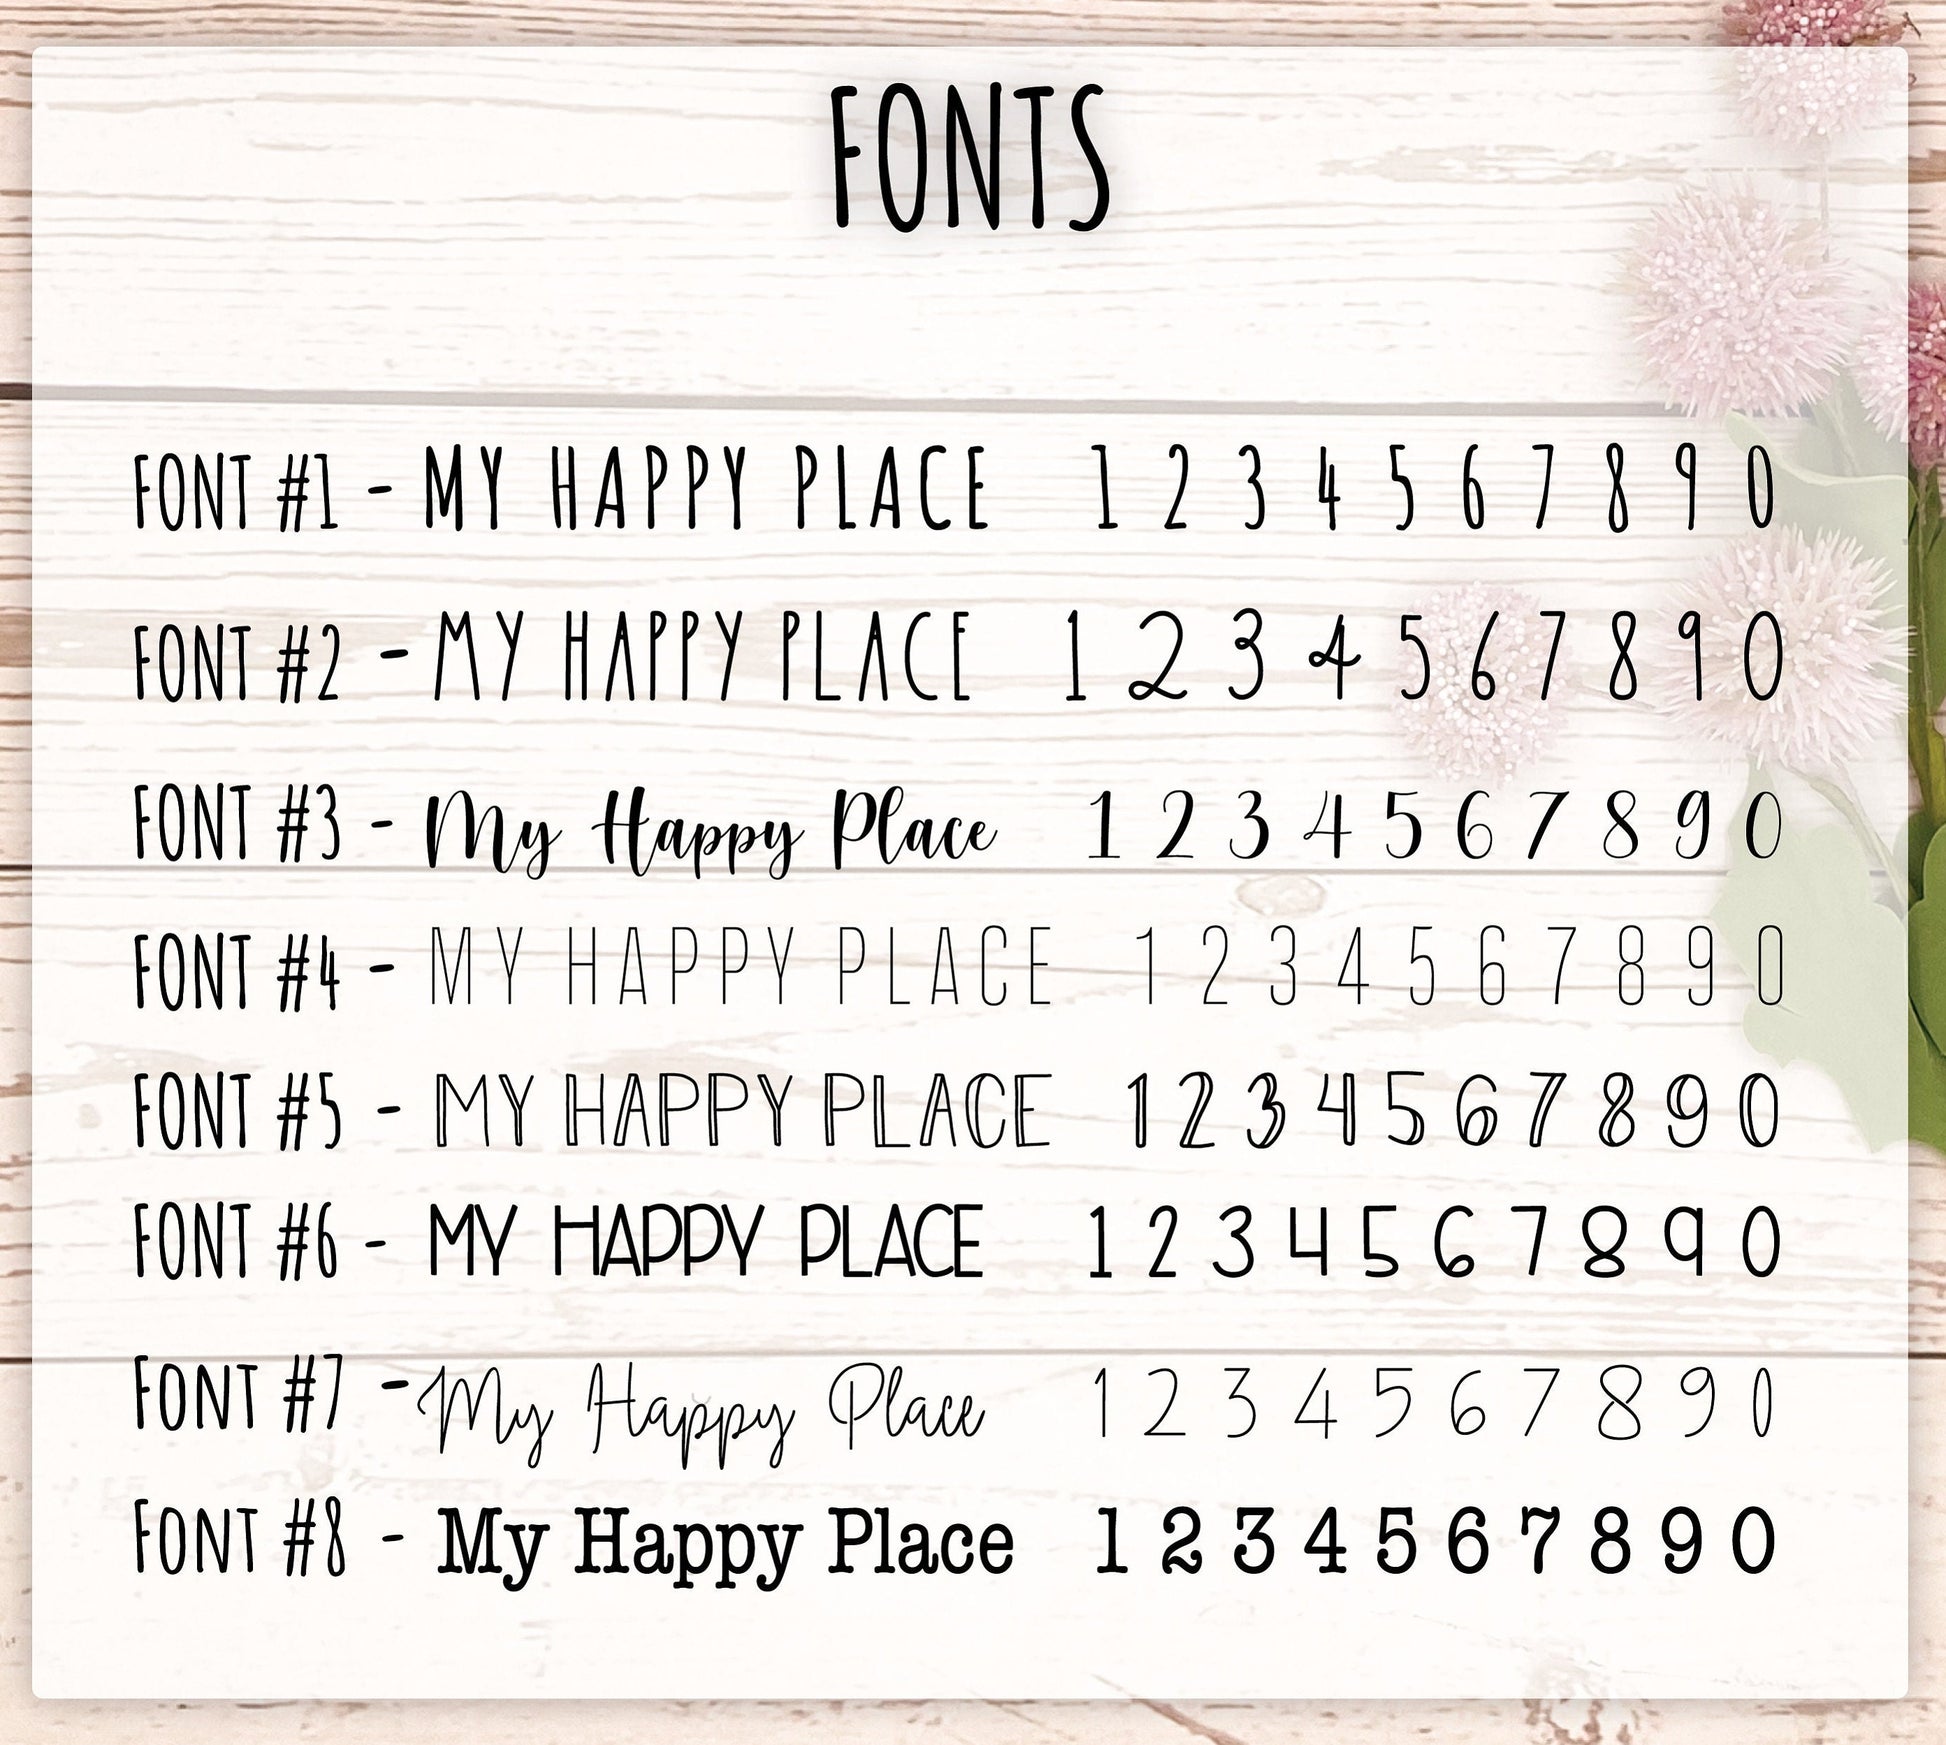 Small Date Number Stickers for Planners, Organizers and Bullet Journals.  NEW FORMAT || H564